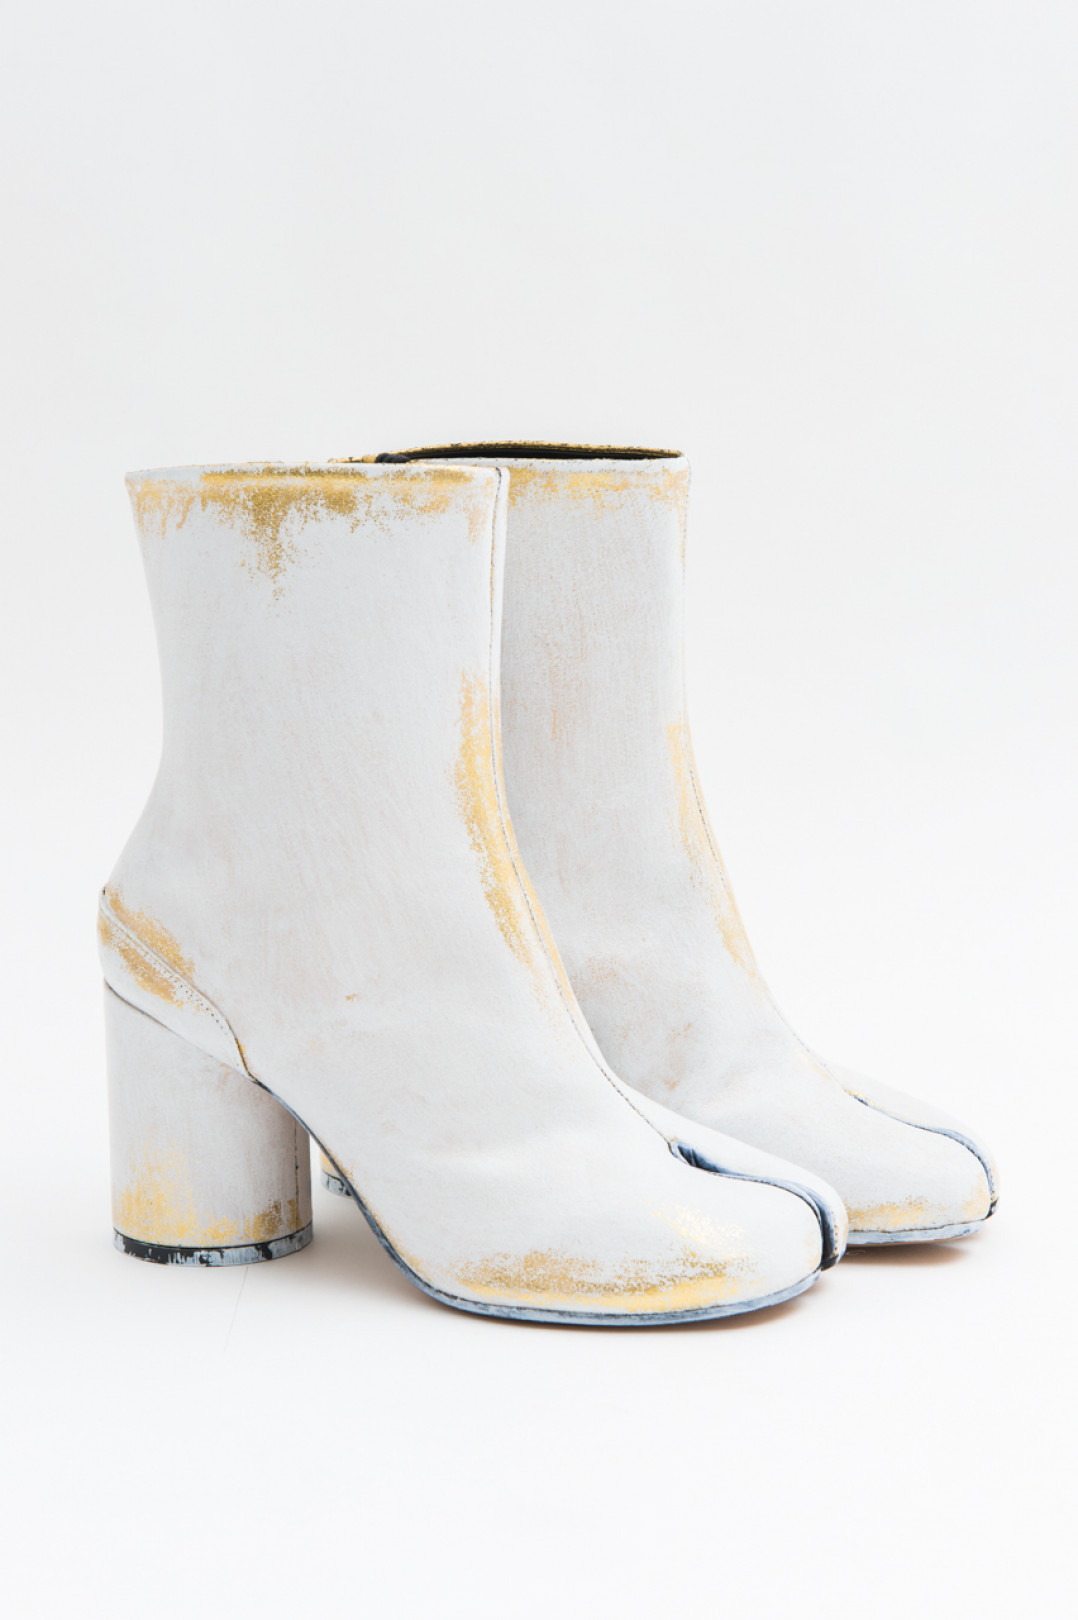 「Exclusive ‘Tabi’ boots for Dover Street Market Ginza」（15万6,000円）